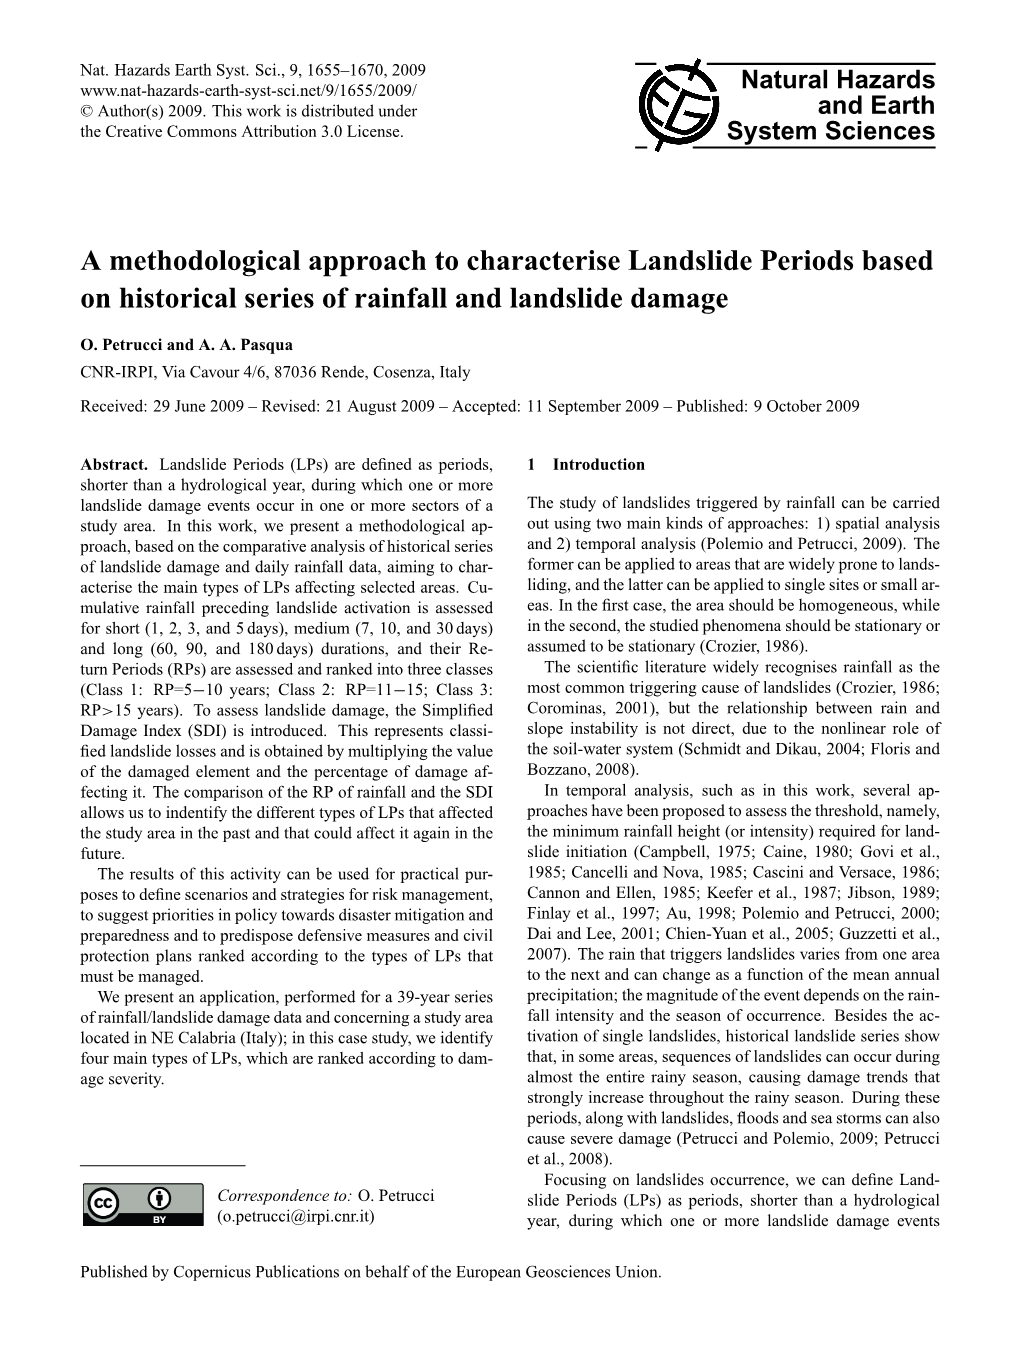 A Methodological Approach to Characterise Landslide Periods Based on Historical Series of Rainfall and Landslide Damage